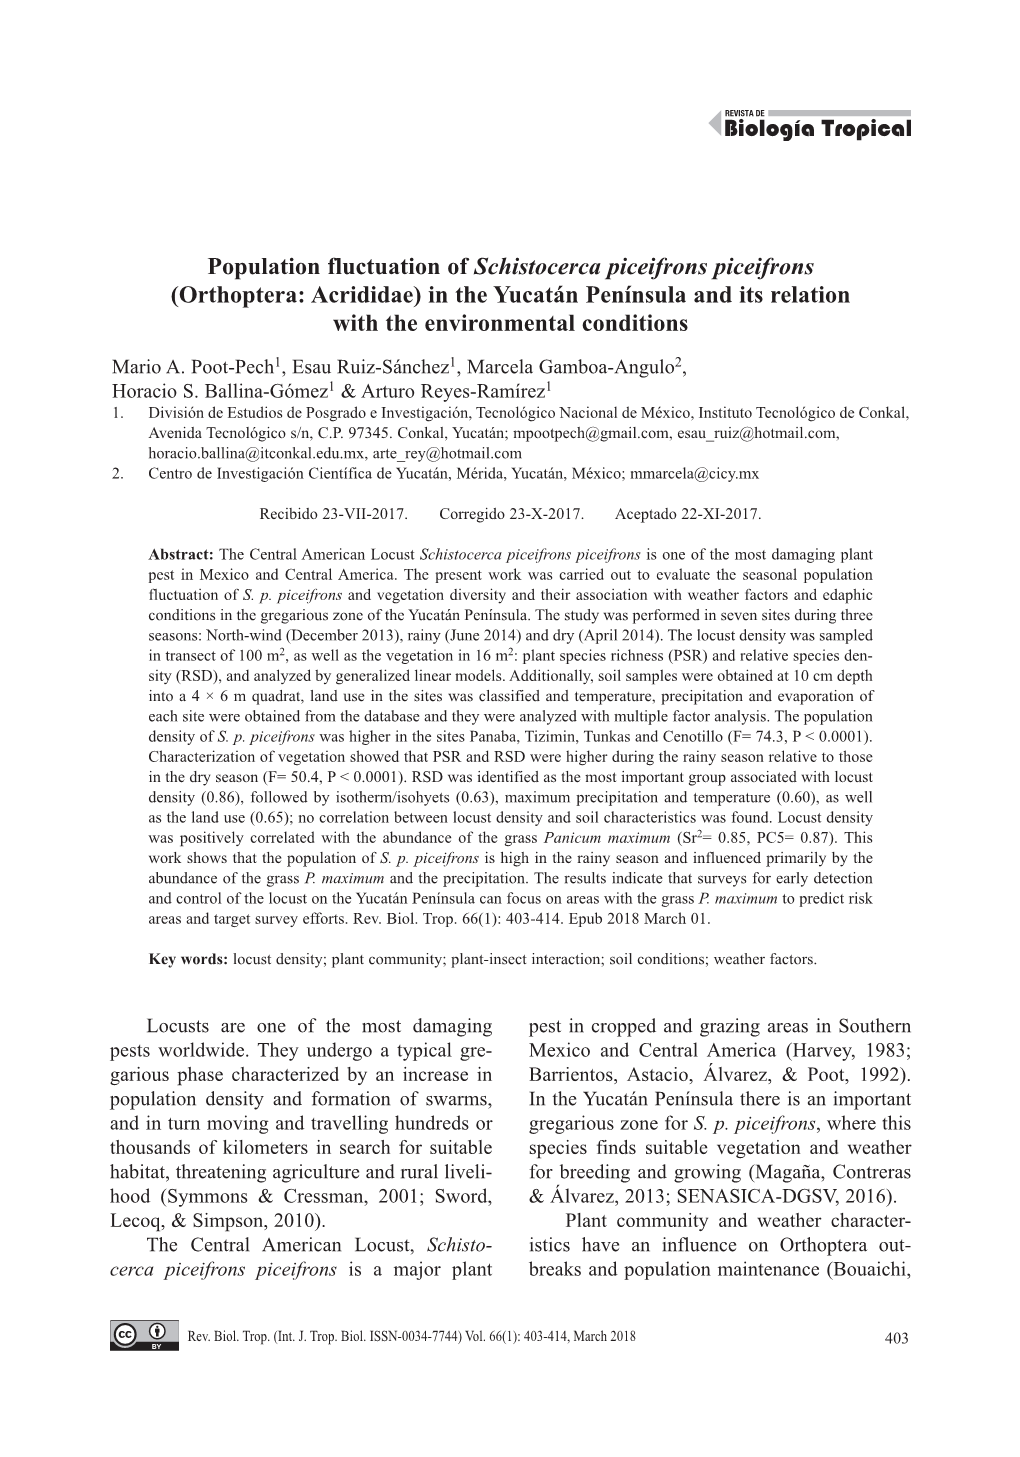 (Orthoptera: Acrididae) in the Yucatán Península and Its Relation with the Environmental Conditions